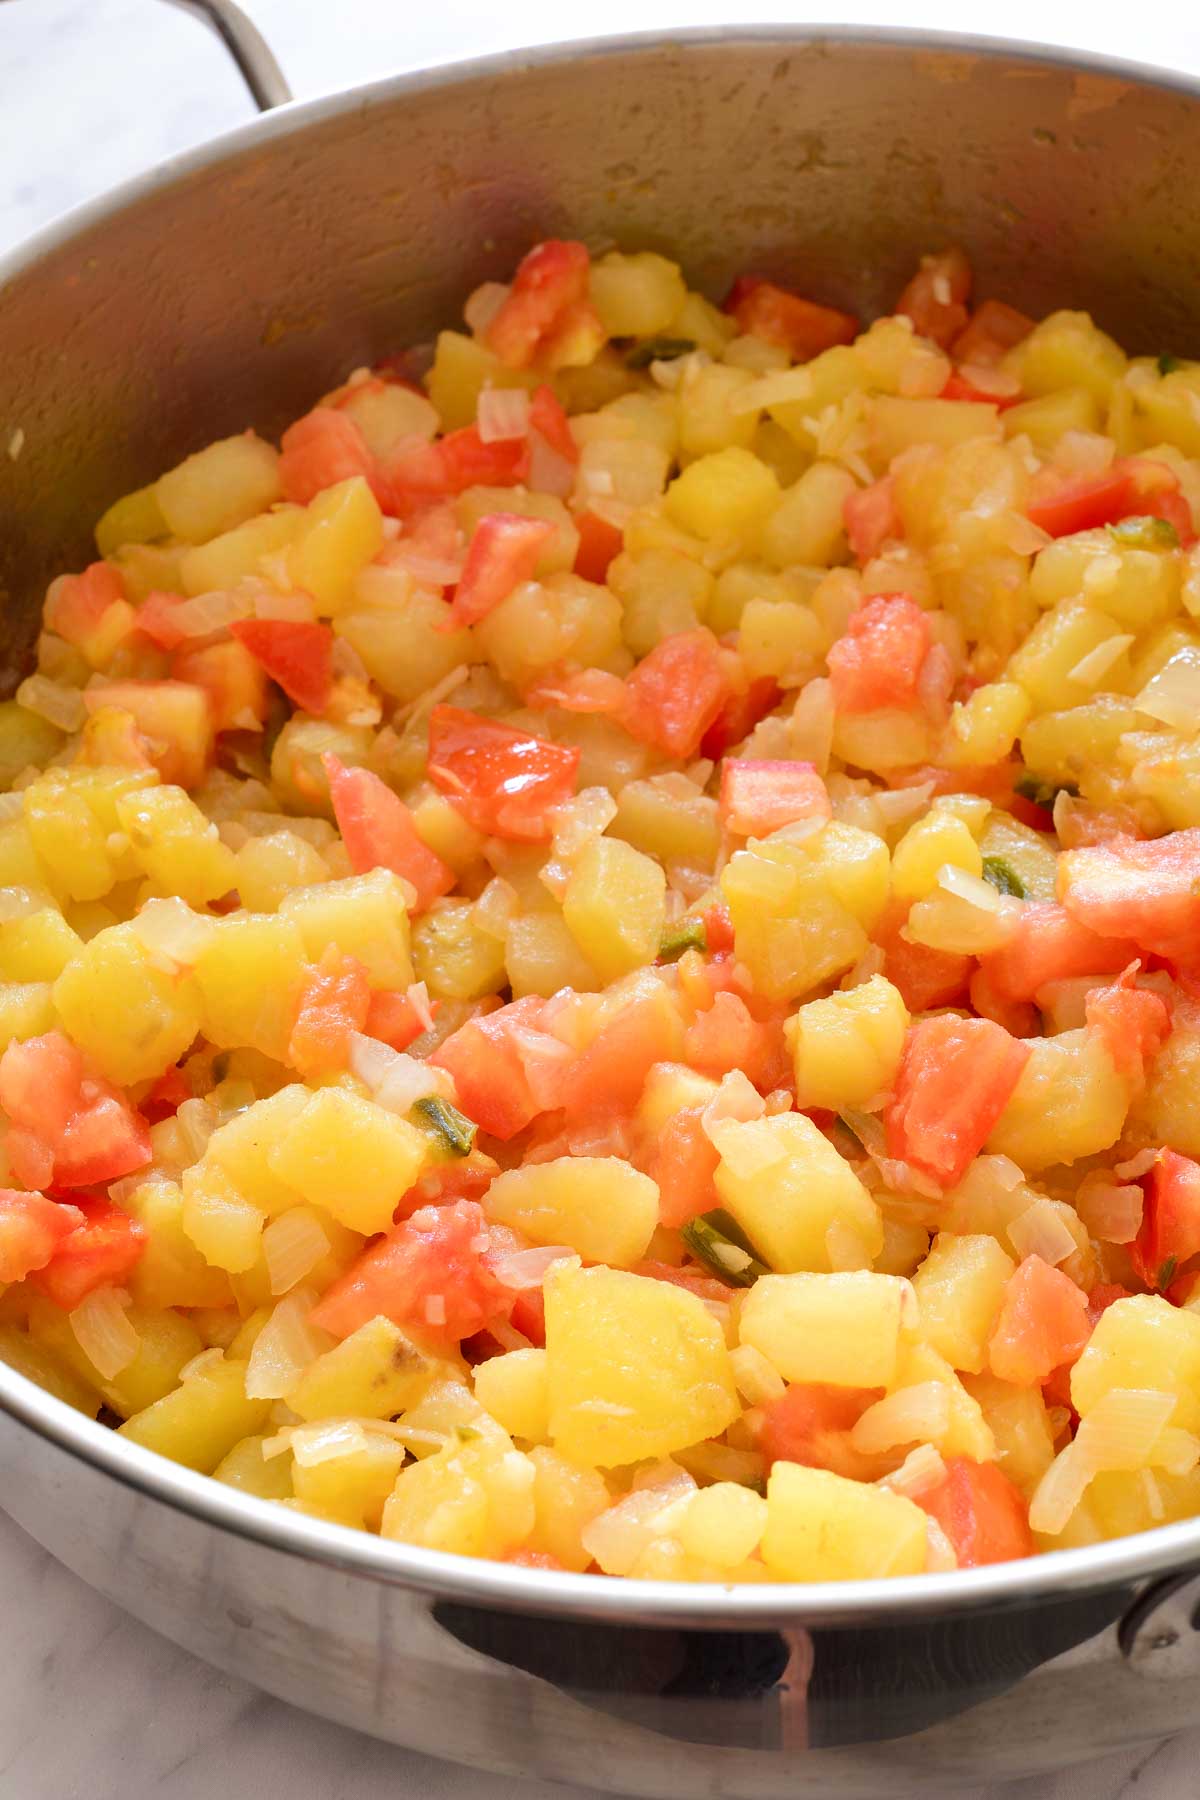 Fried diced potatoes, onions, garlic, jalapenos and tomatoes in a pan.